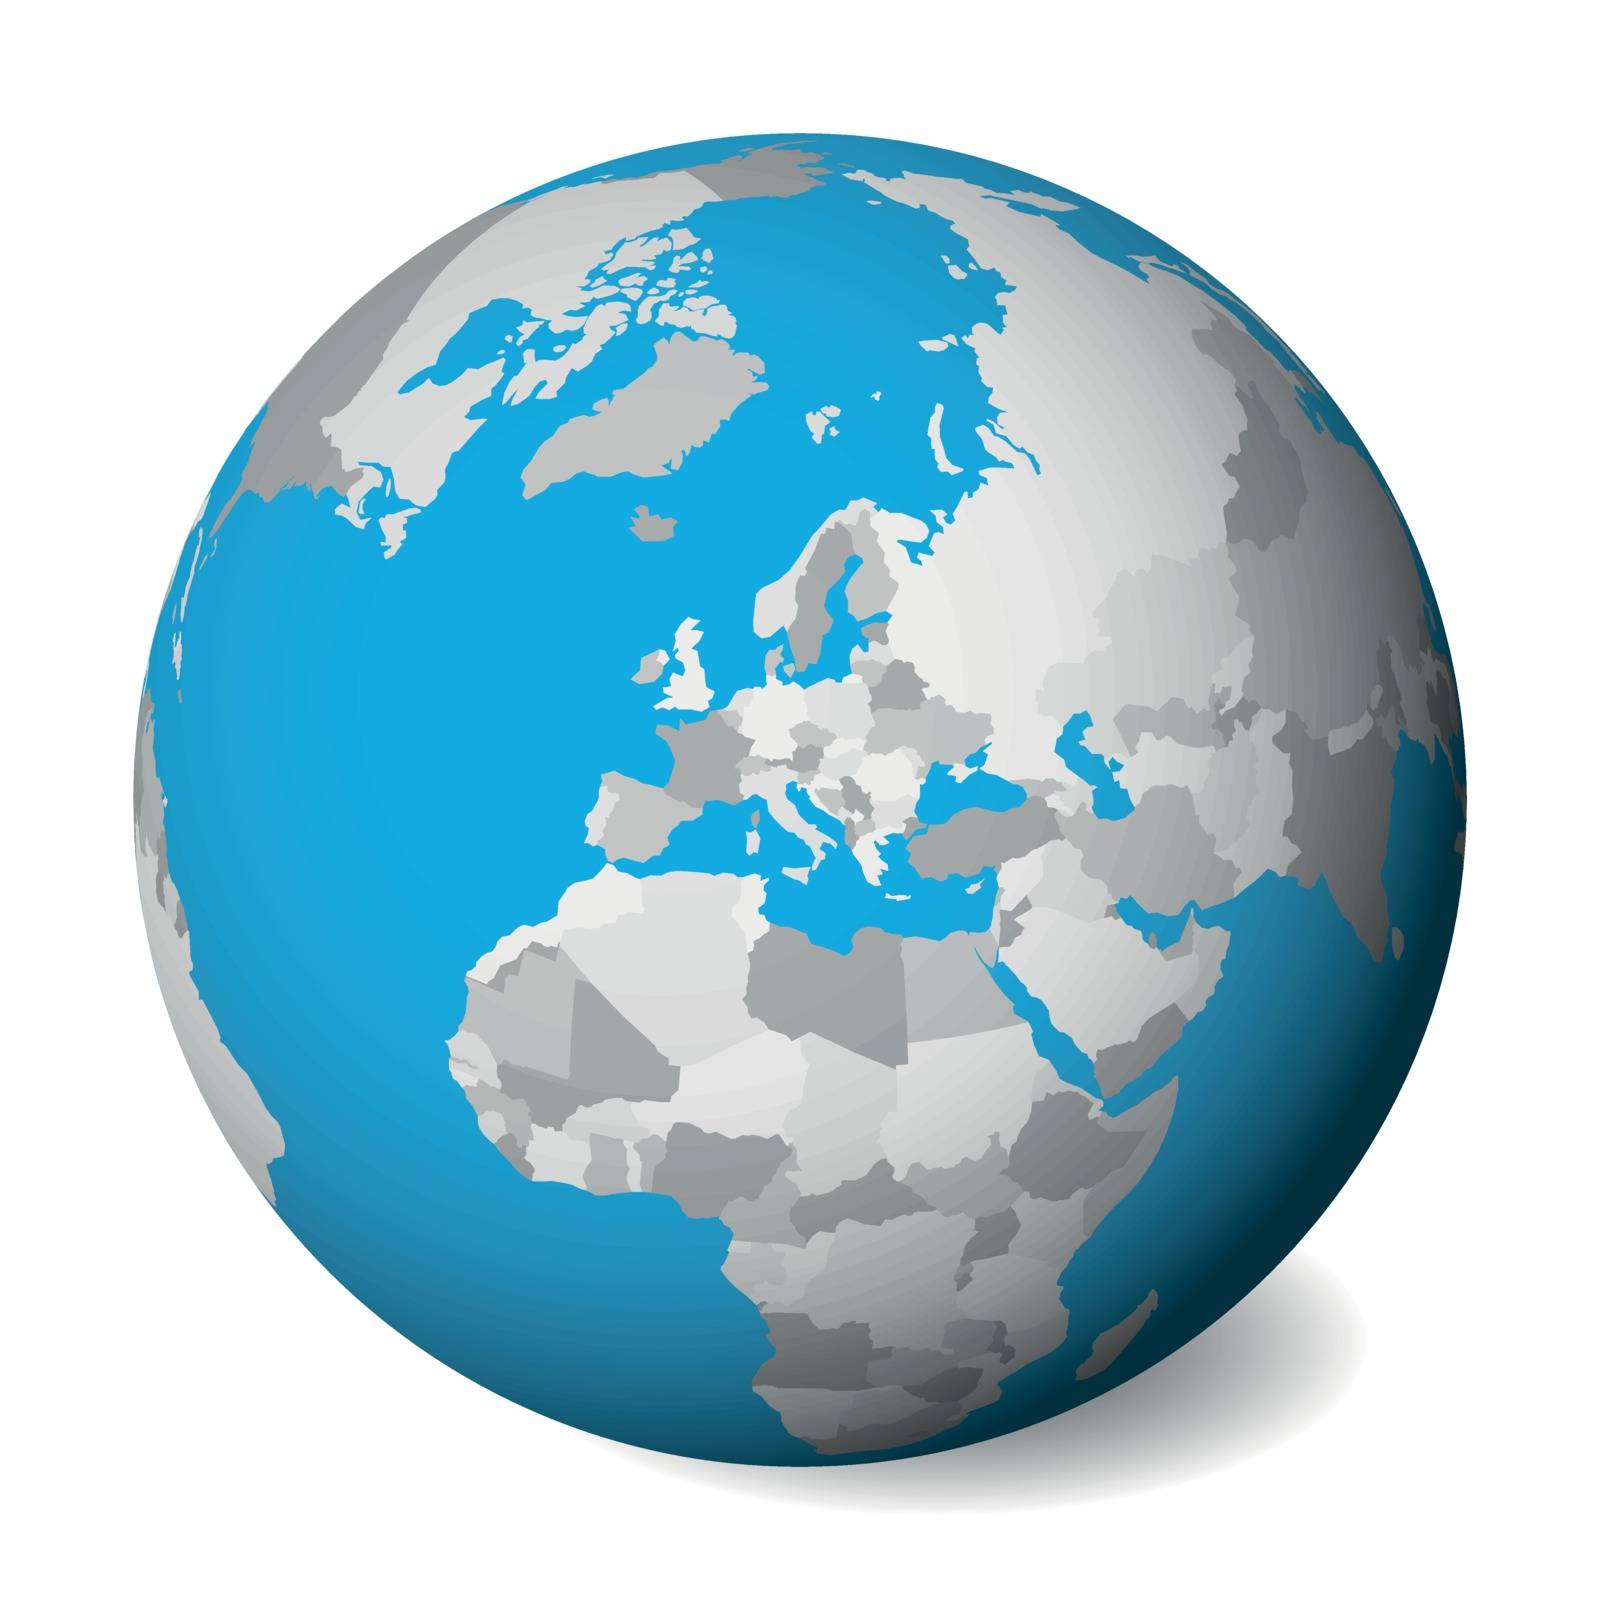 Blank political map of Europe. 3D Earth globe with blue water and grey lands. Vector illustration by pyty